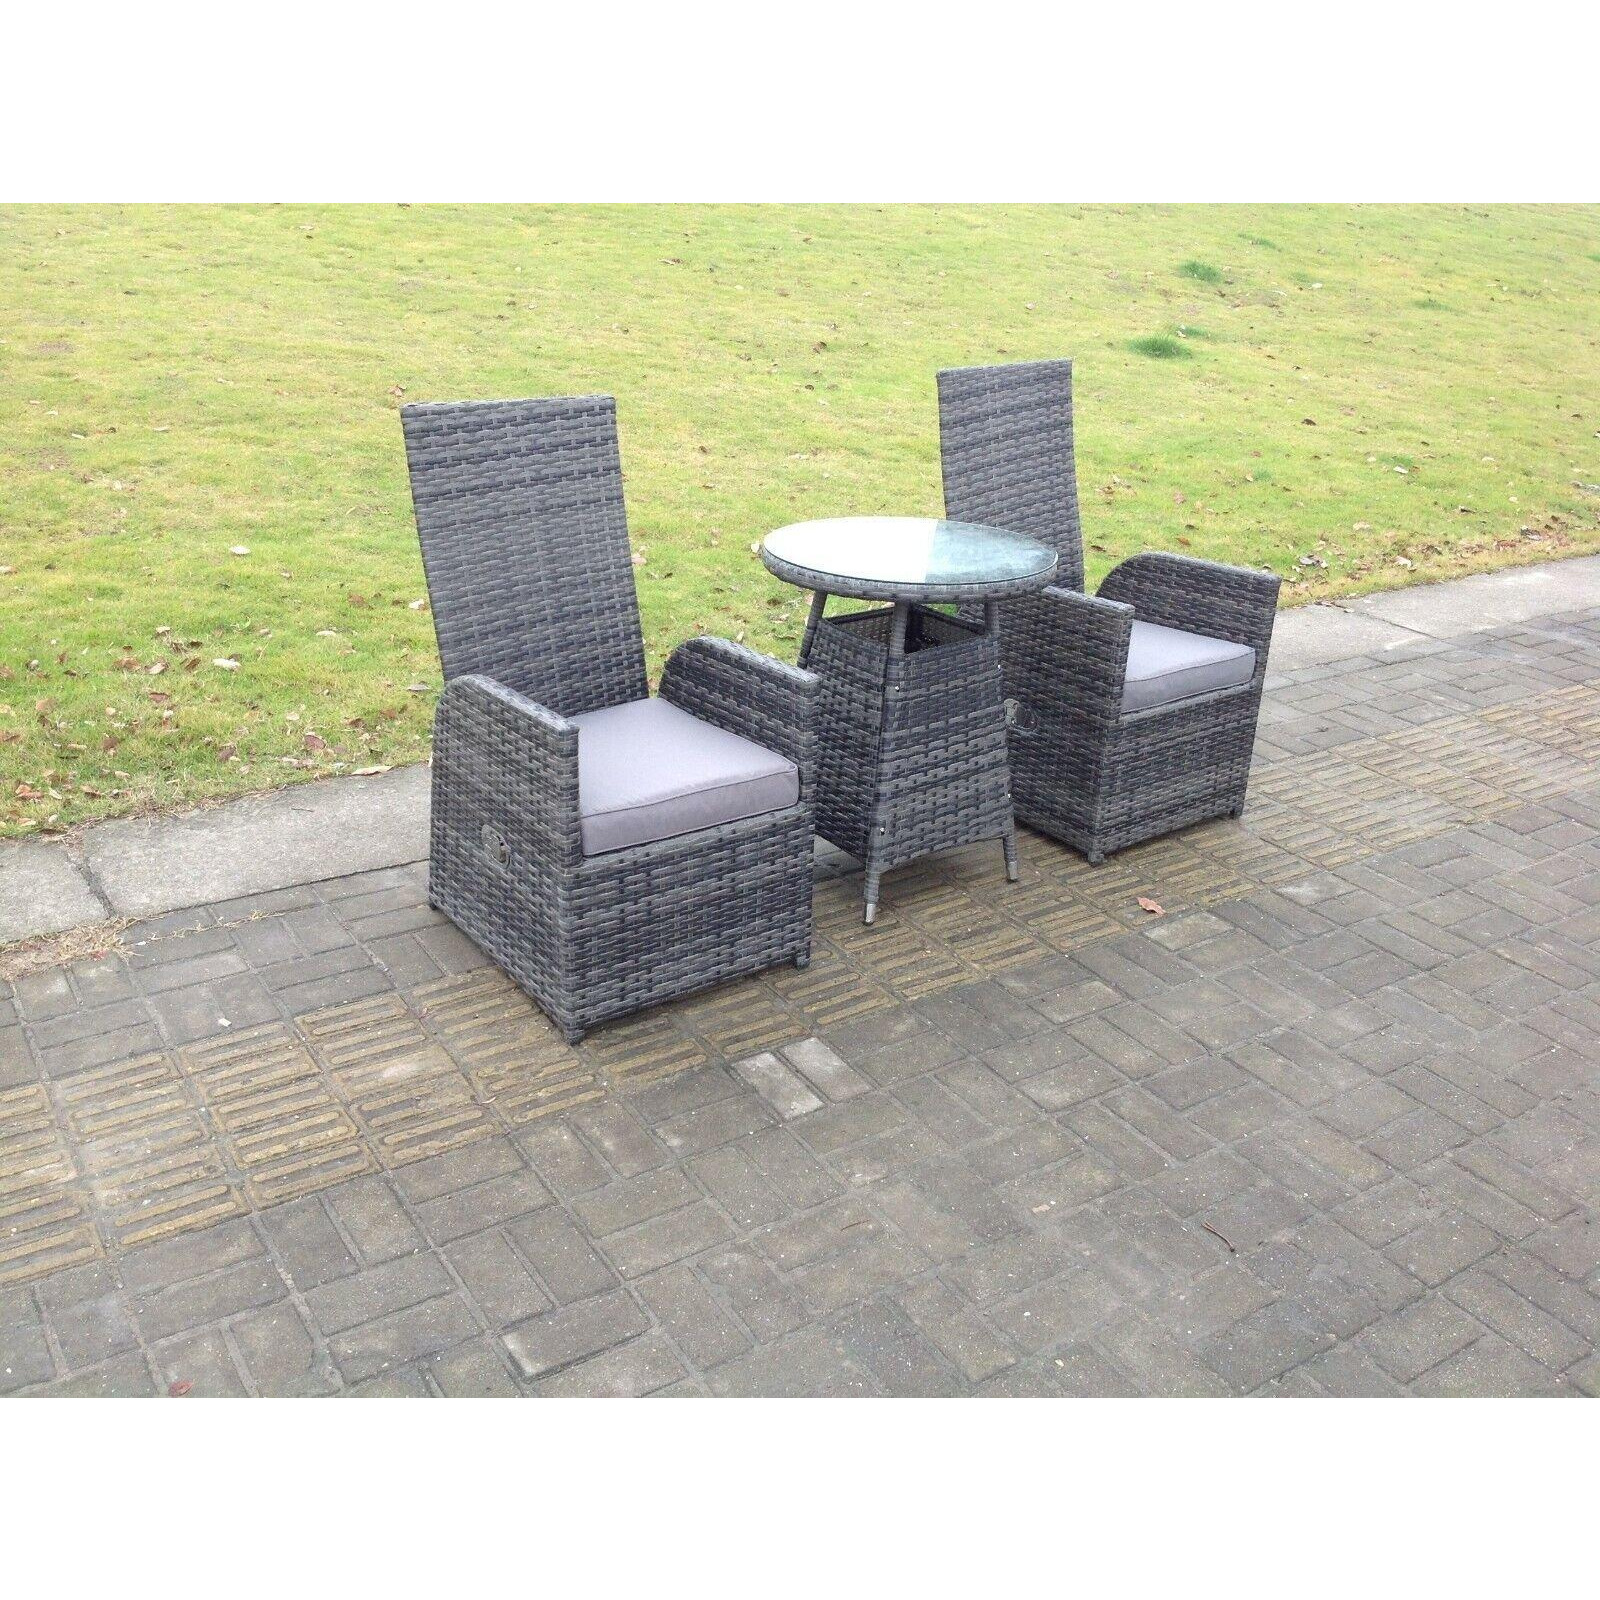 Outdoor Wicker Rattan Garden Furniture Reclining Chair And Table Dining Sets 2 Seater Bistro Round Table - image 1